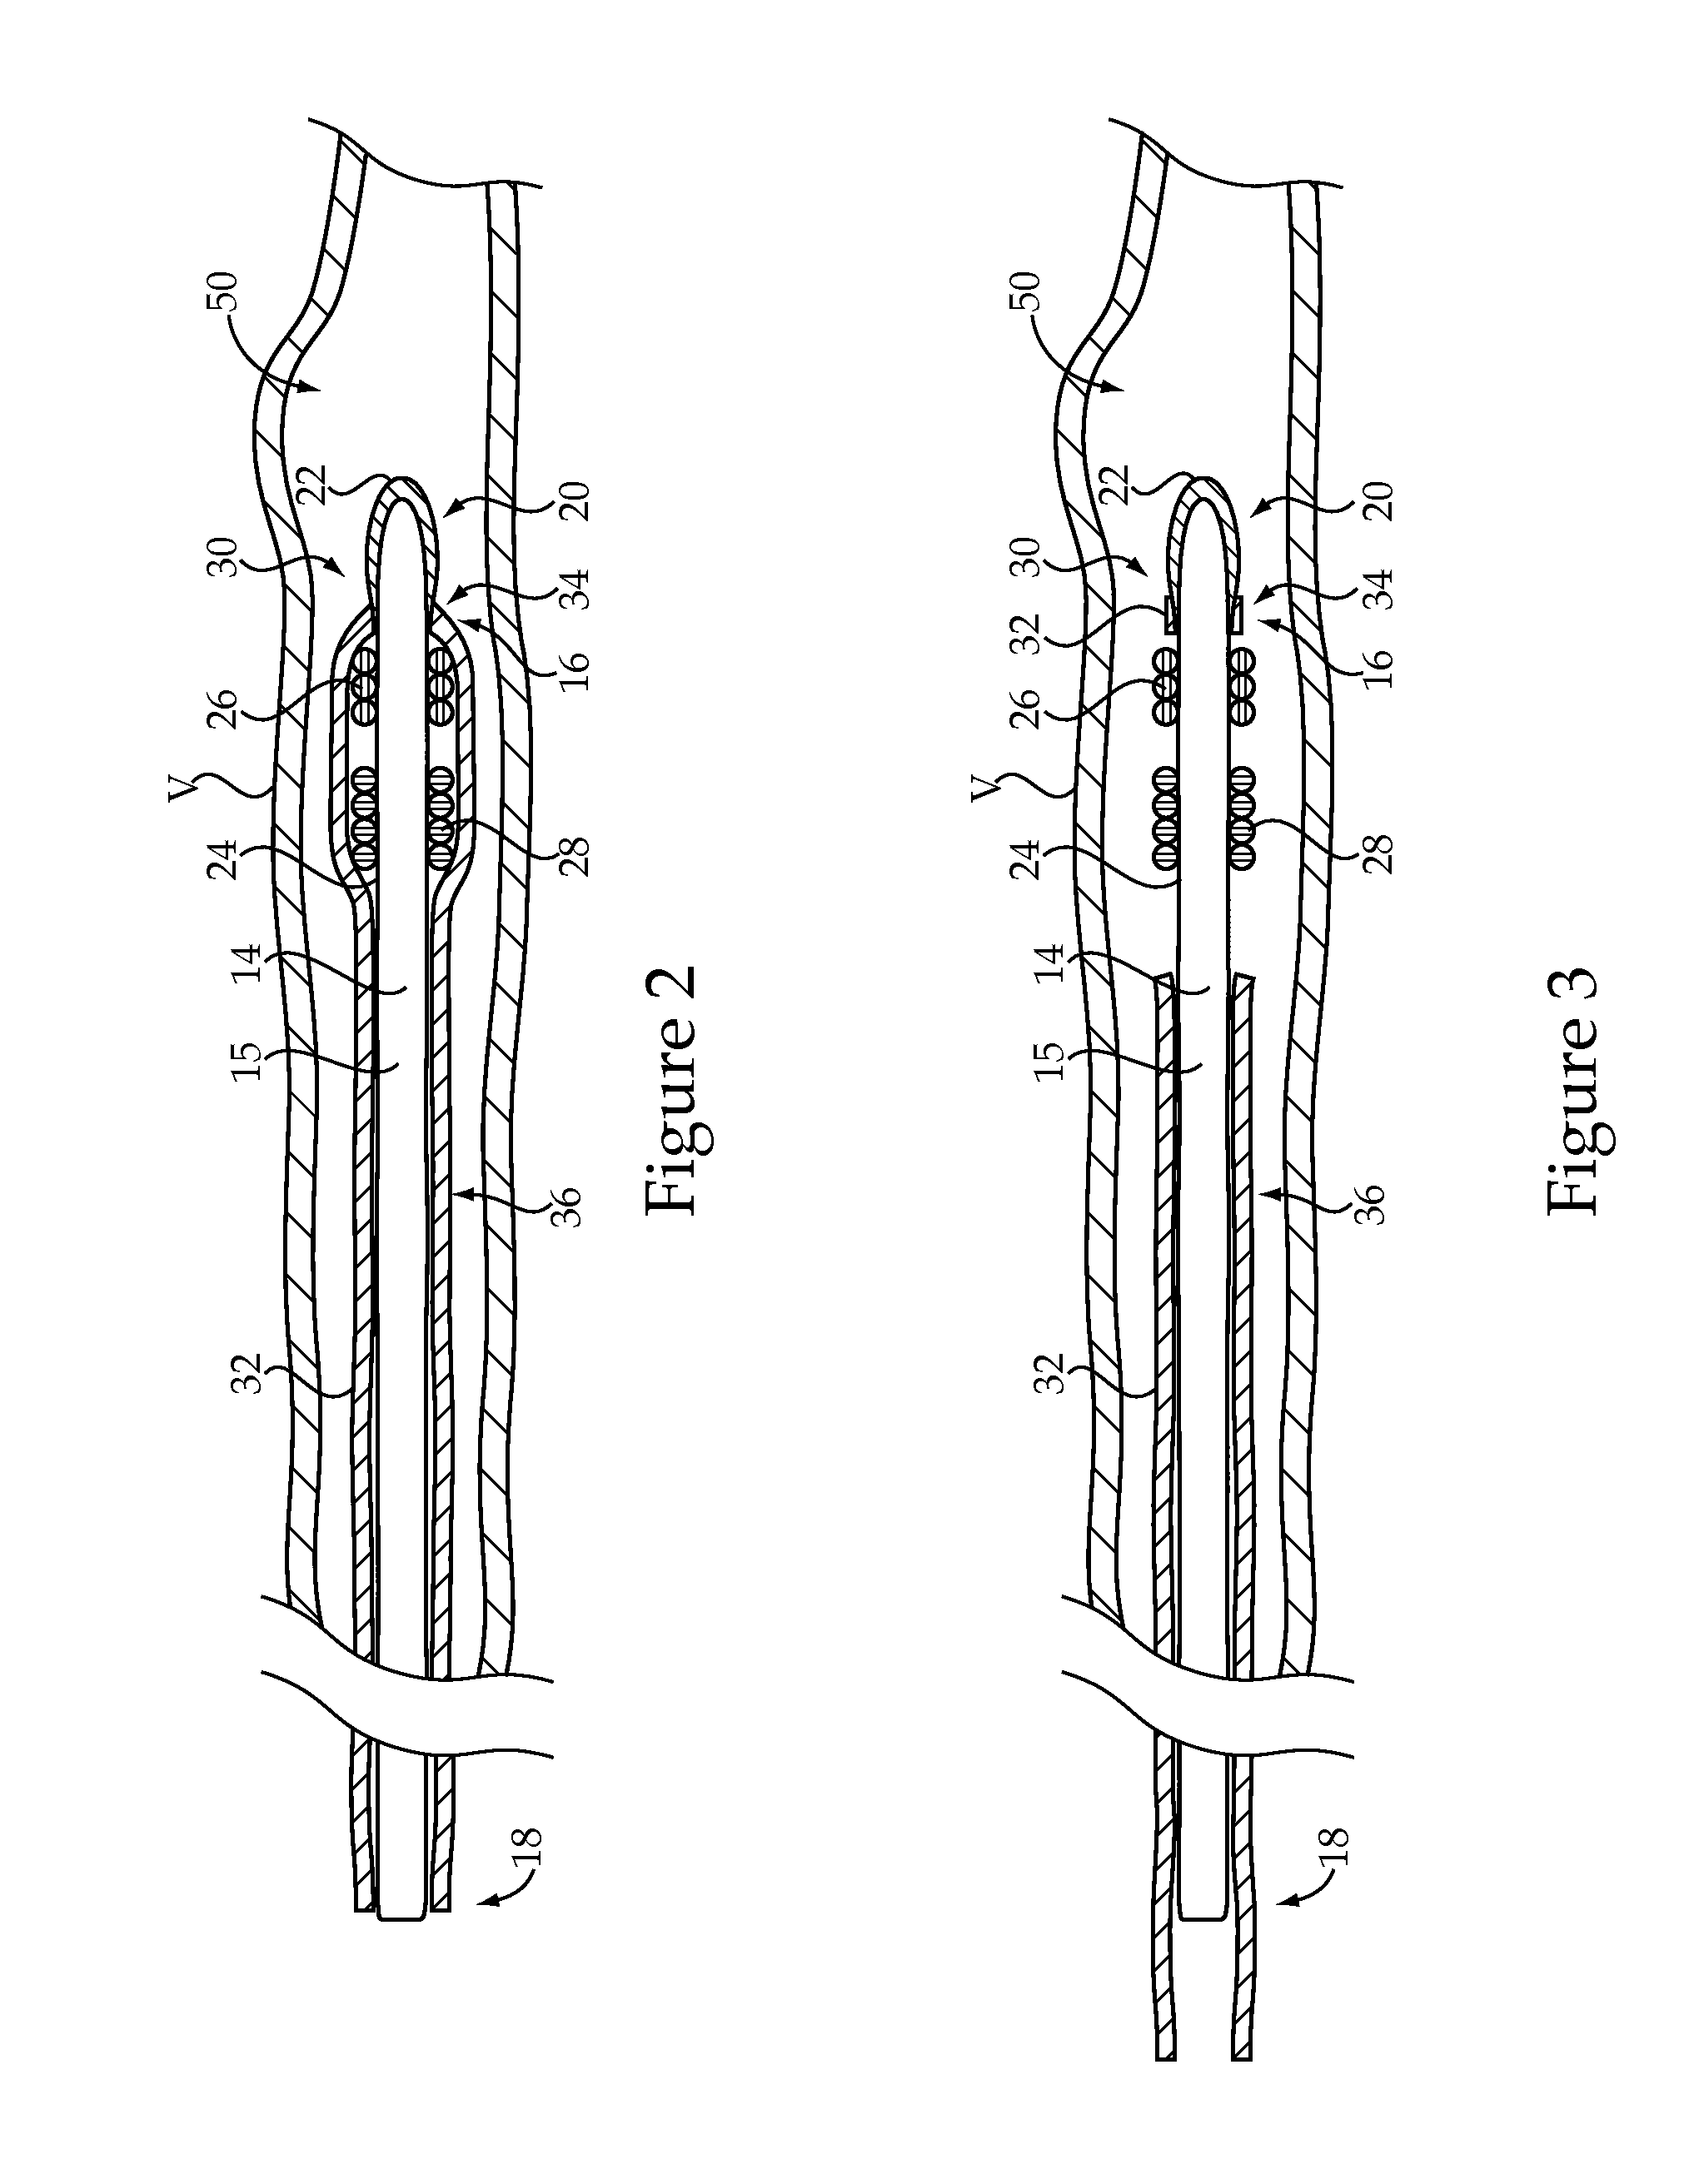 Embolic coil delivery system